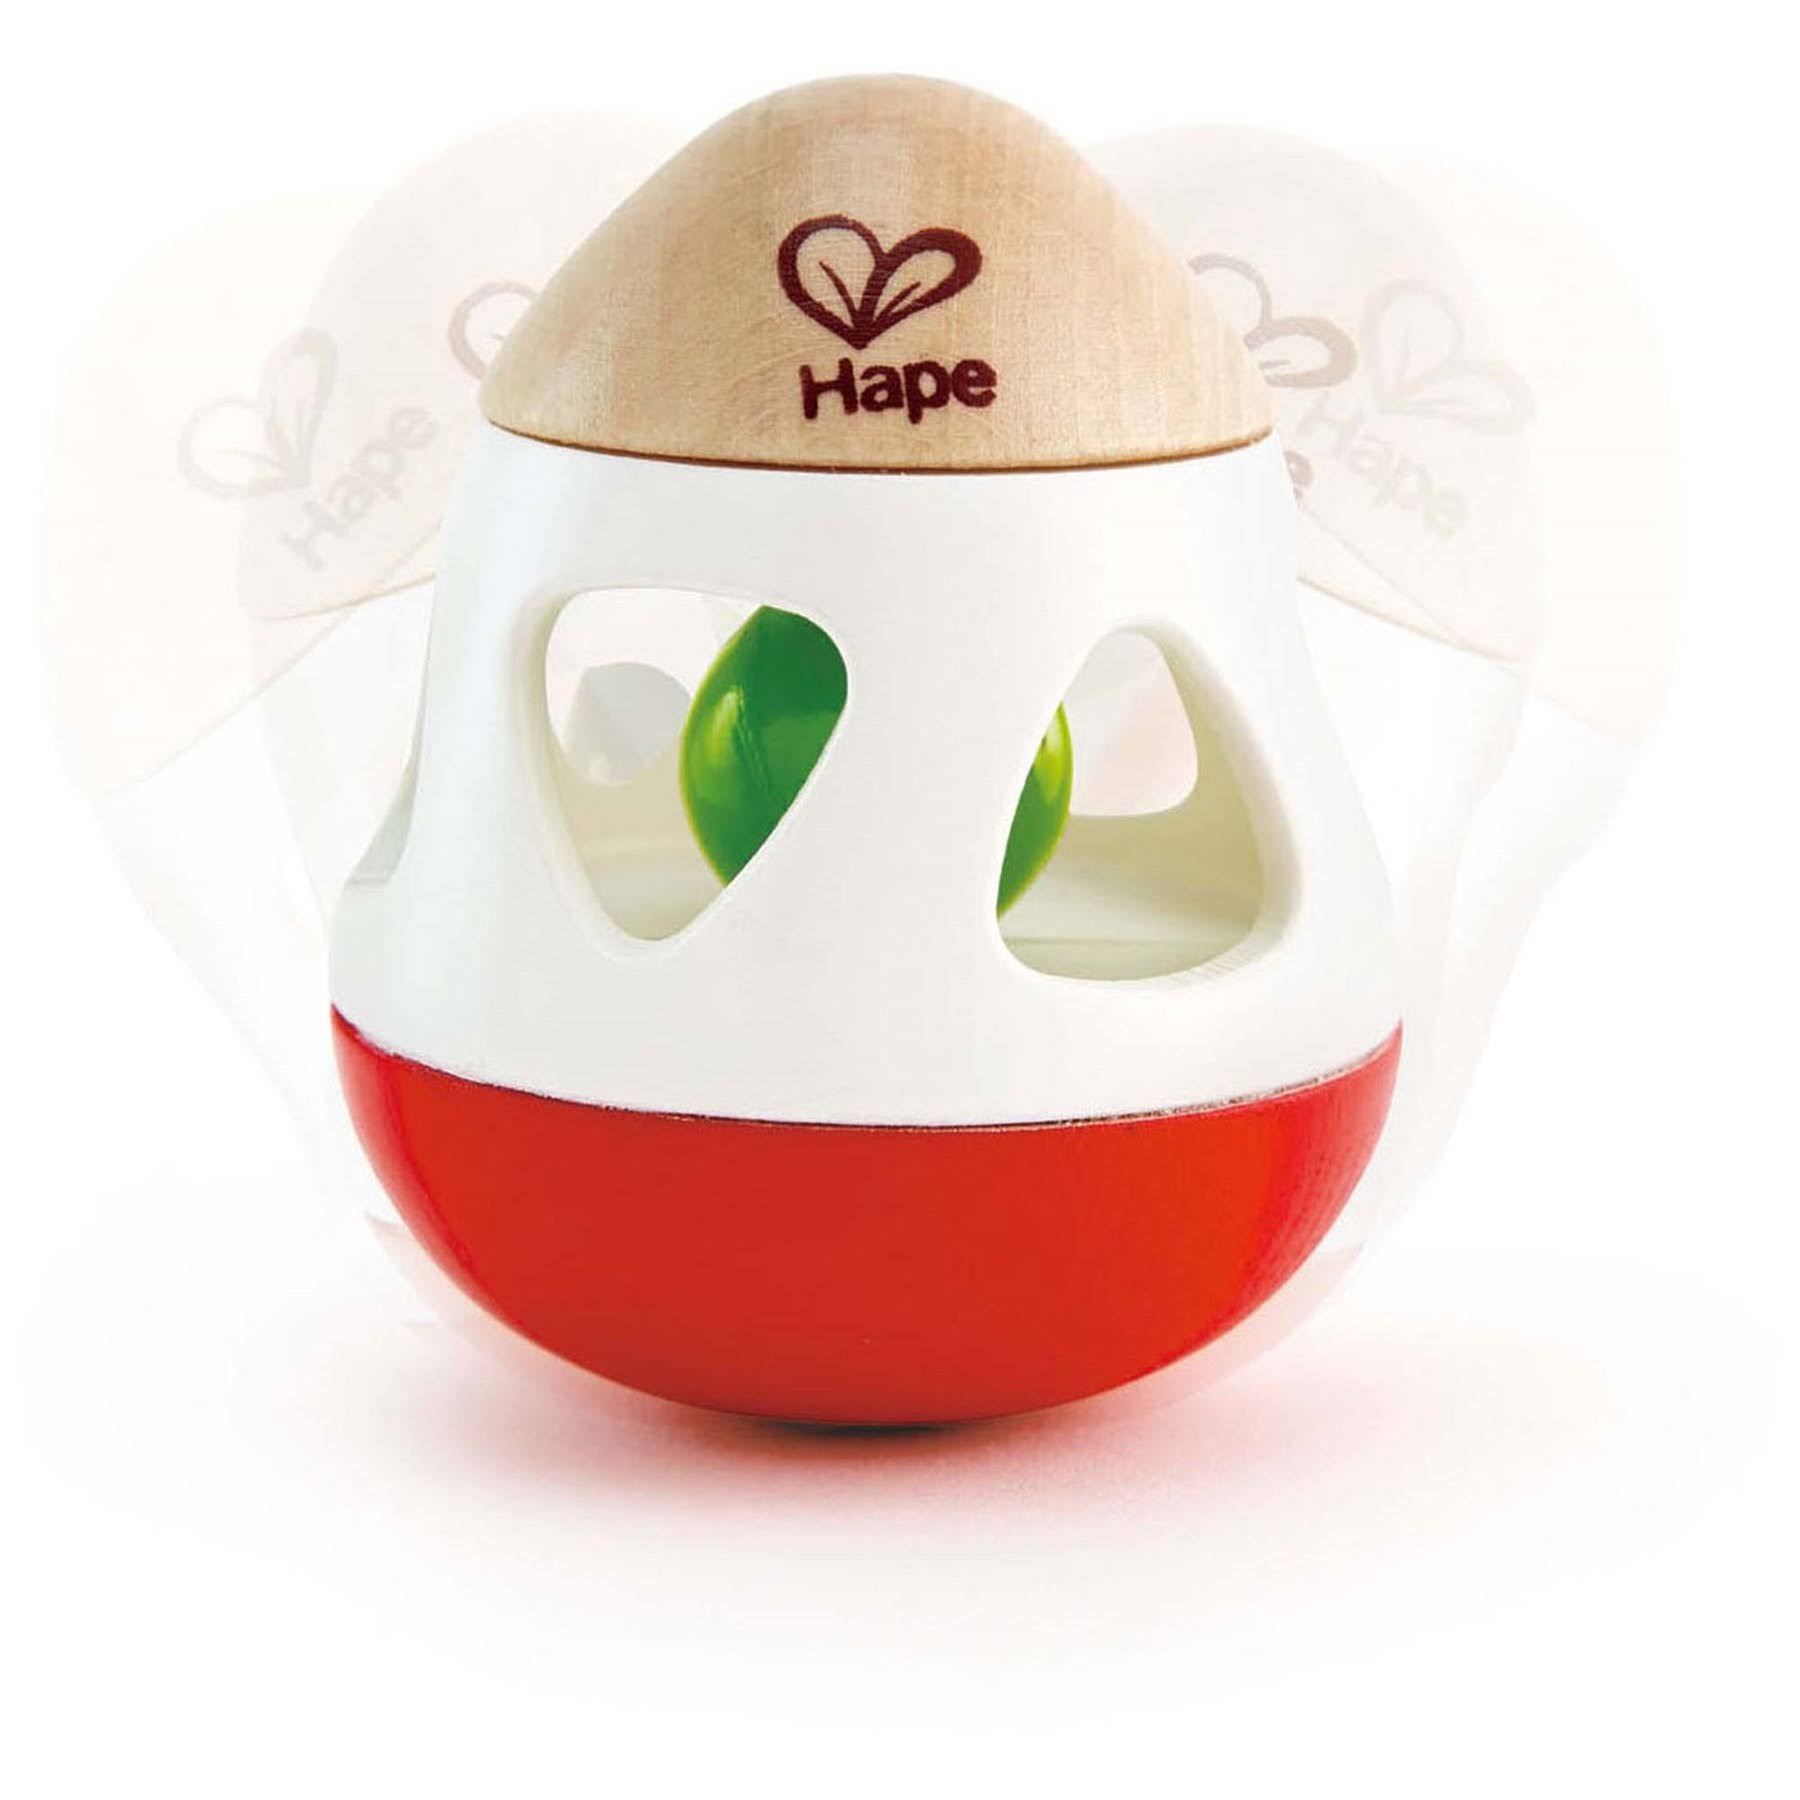 Hape Bell Rattle Toy